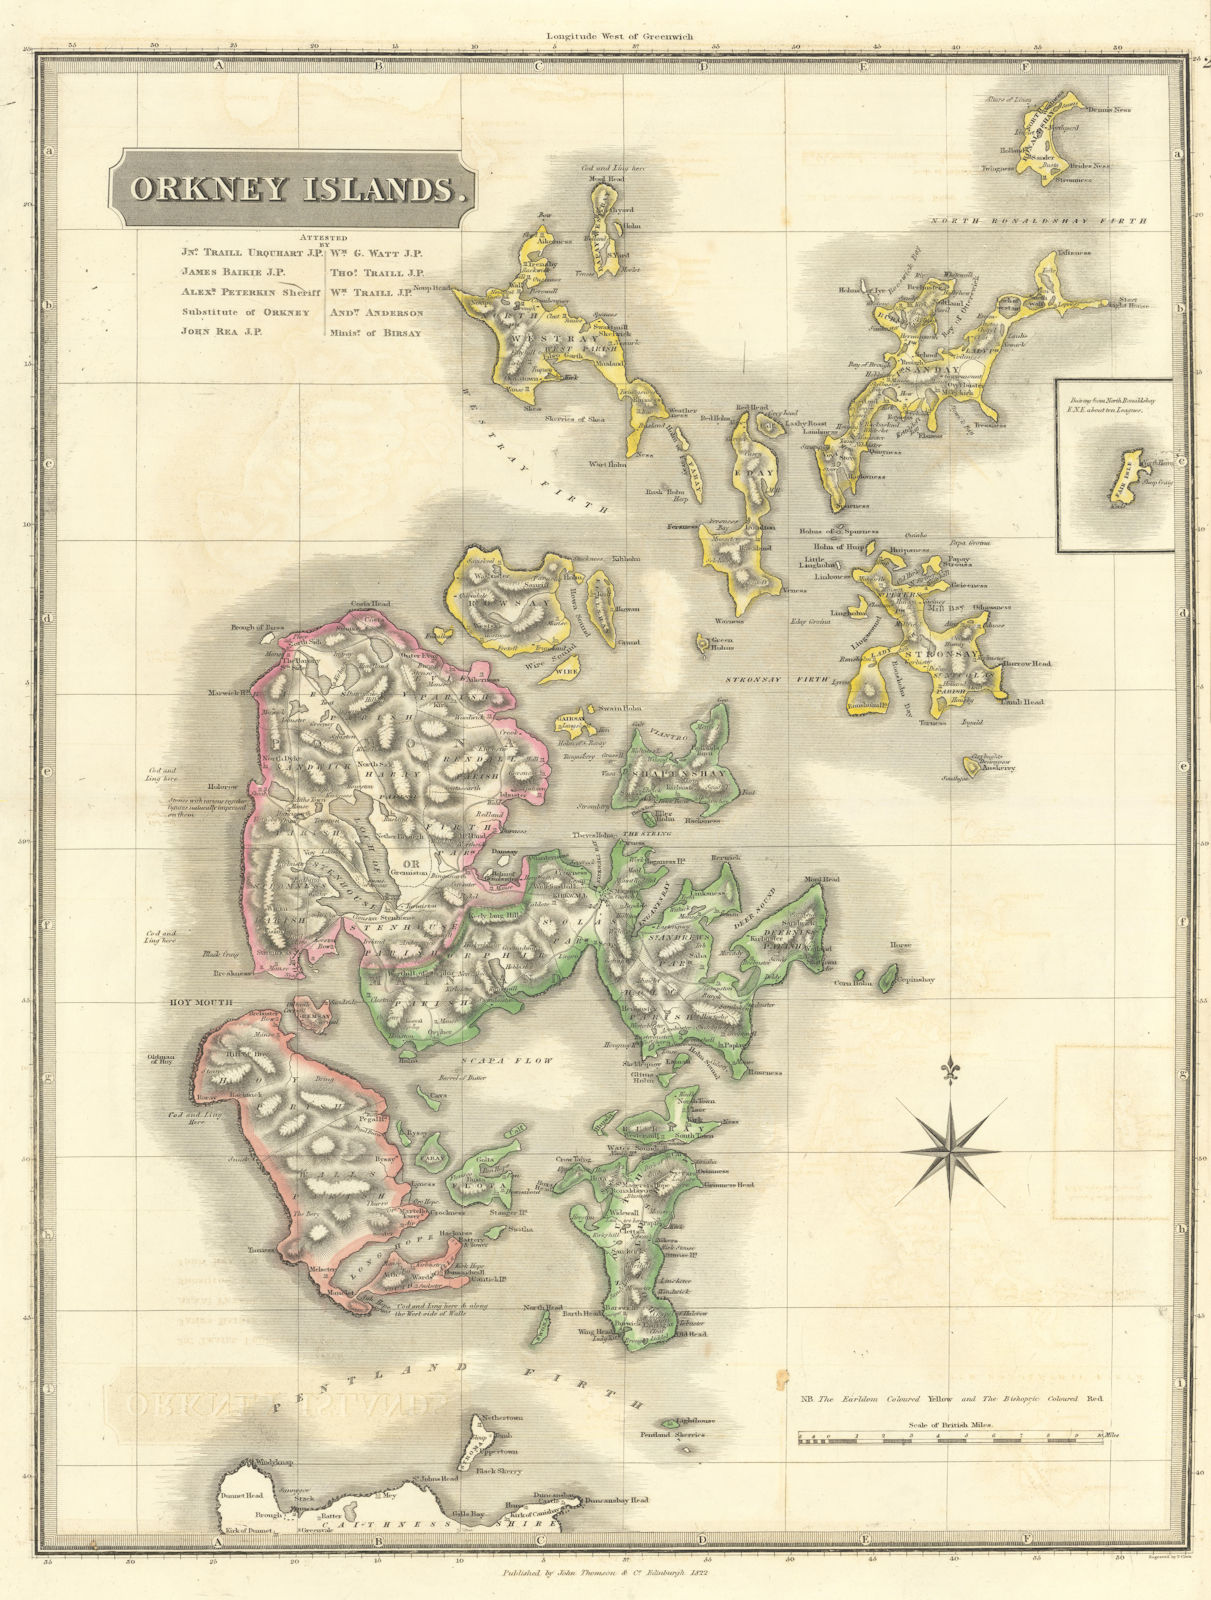 Associate Product Orkney Islands. Kirkwall. Scotland. THOMSON 1832 old antique map plan chart